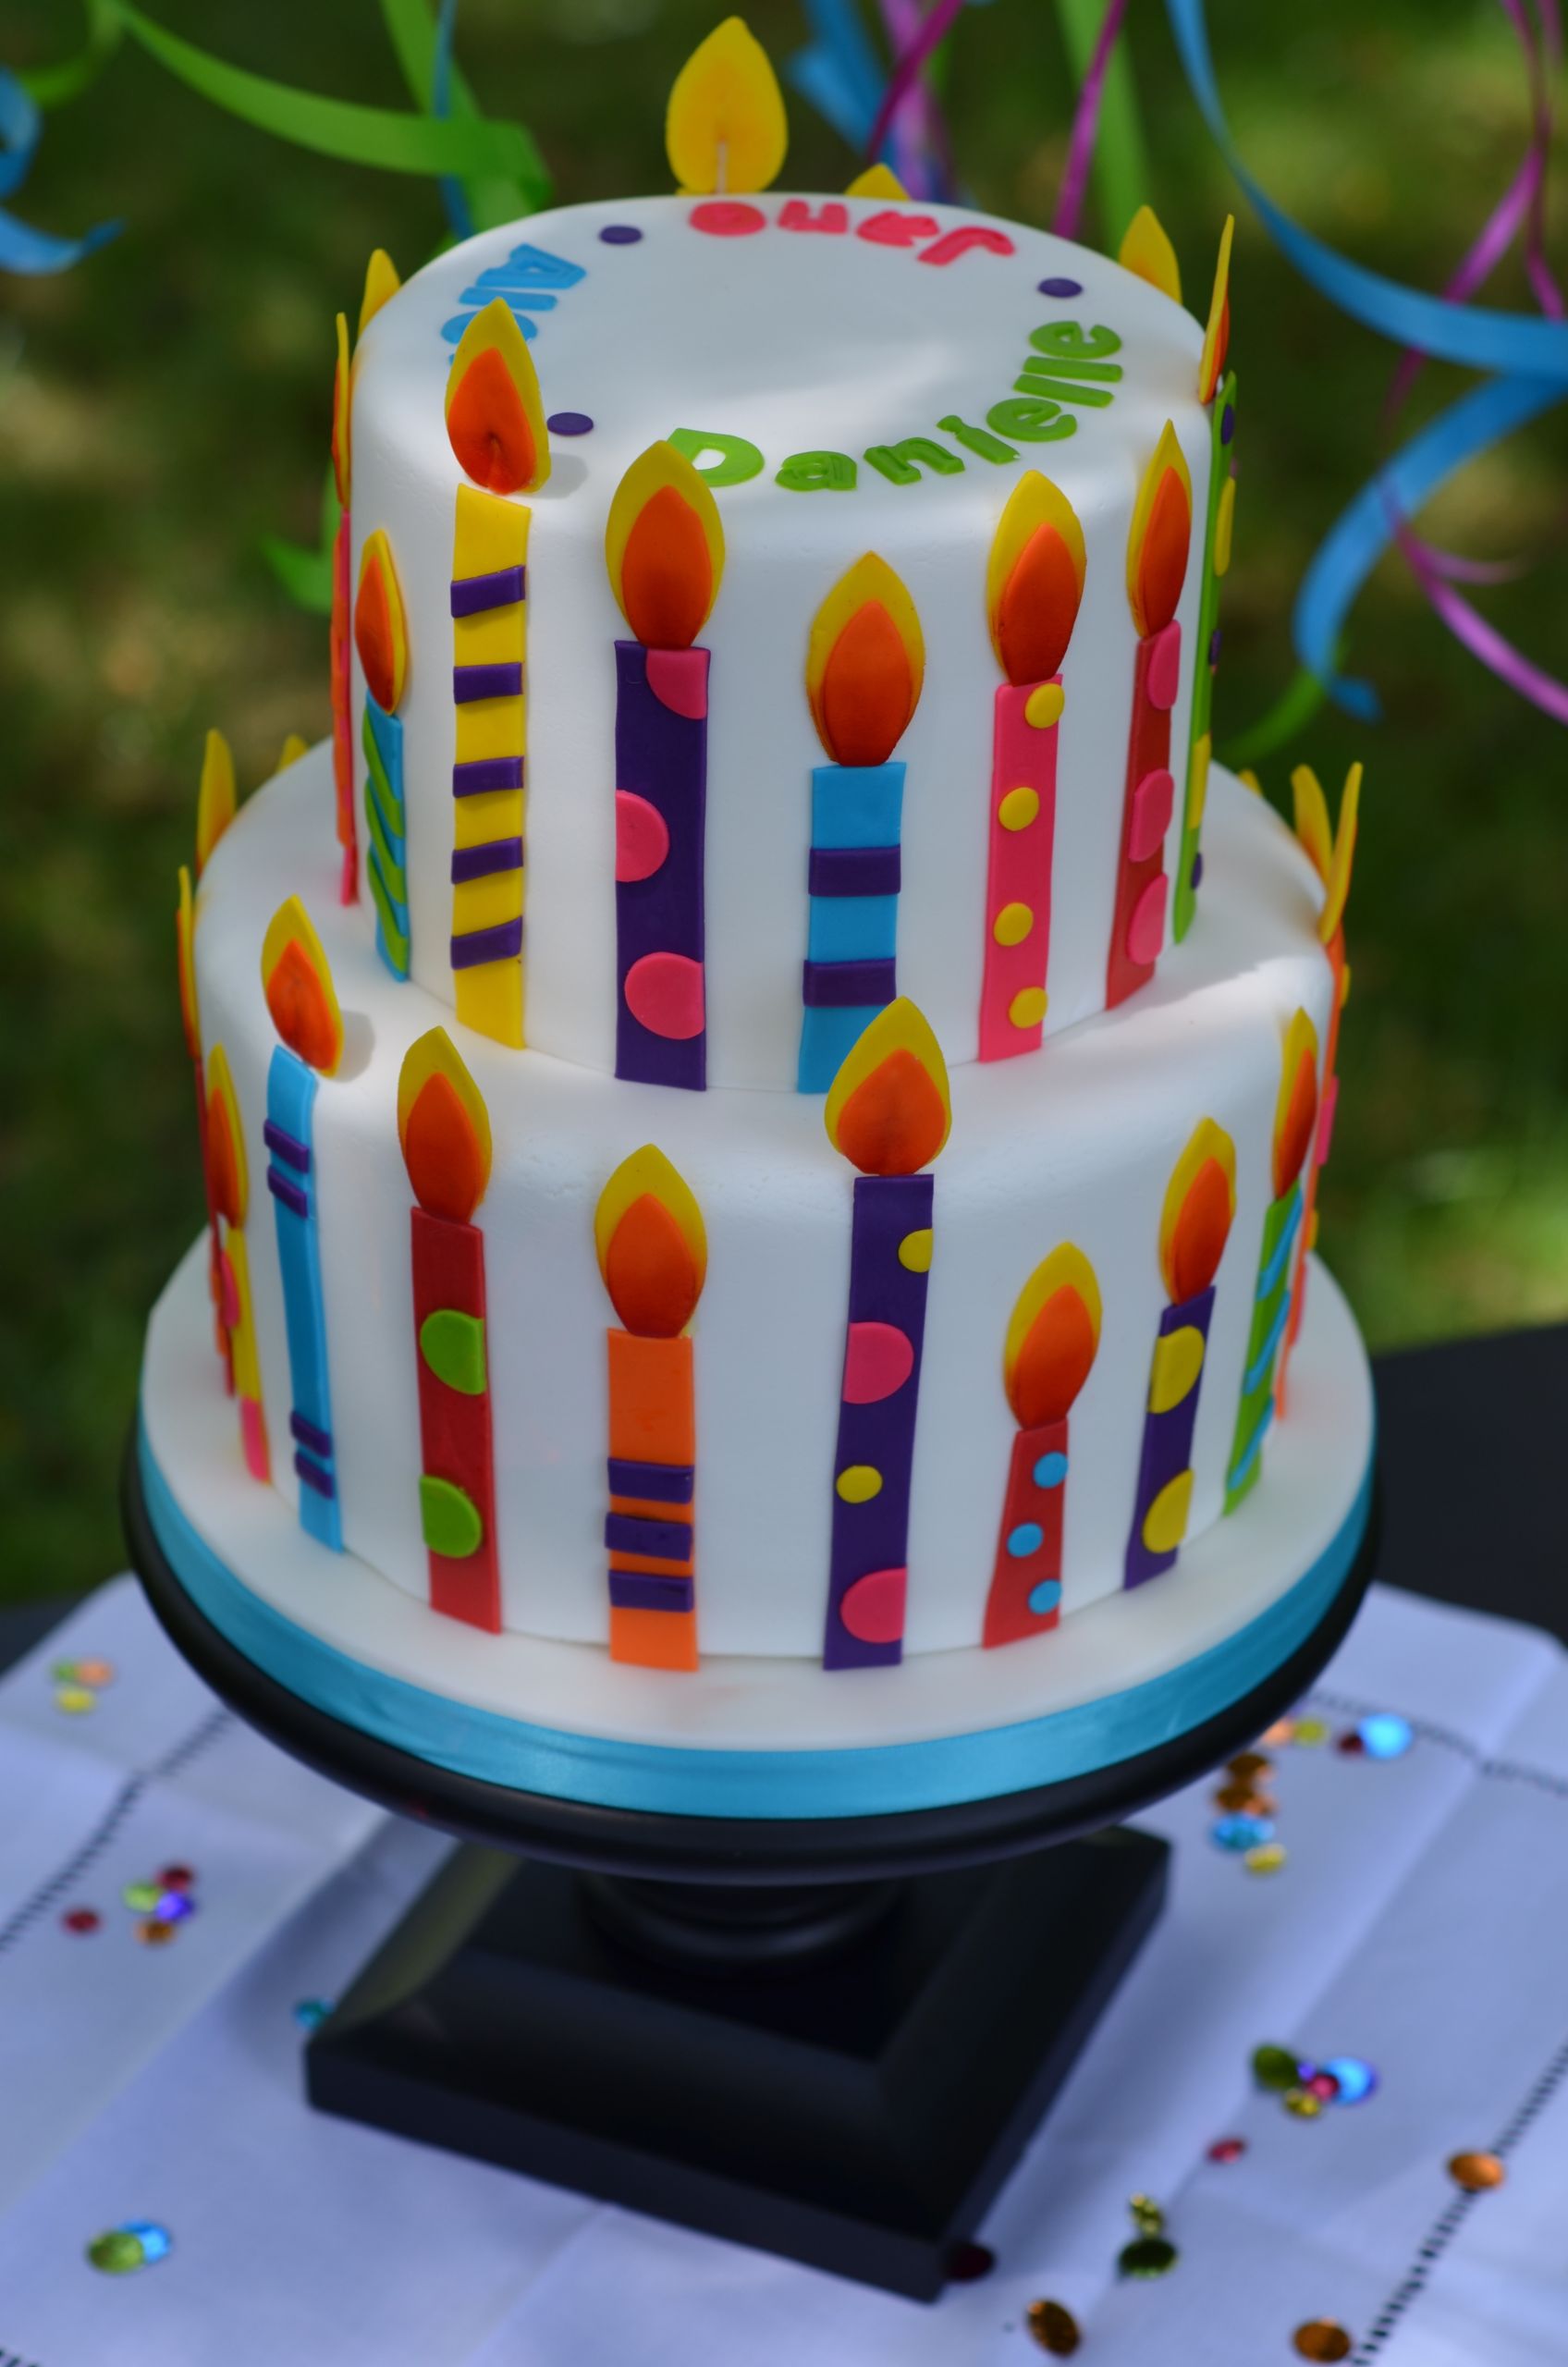 Birthday Cake Picture Best Of Colorful Fondant Candle Birthday Cake Cakecentral